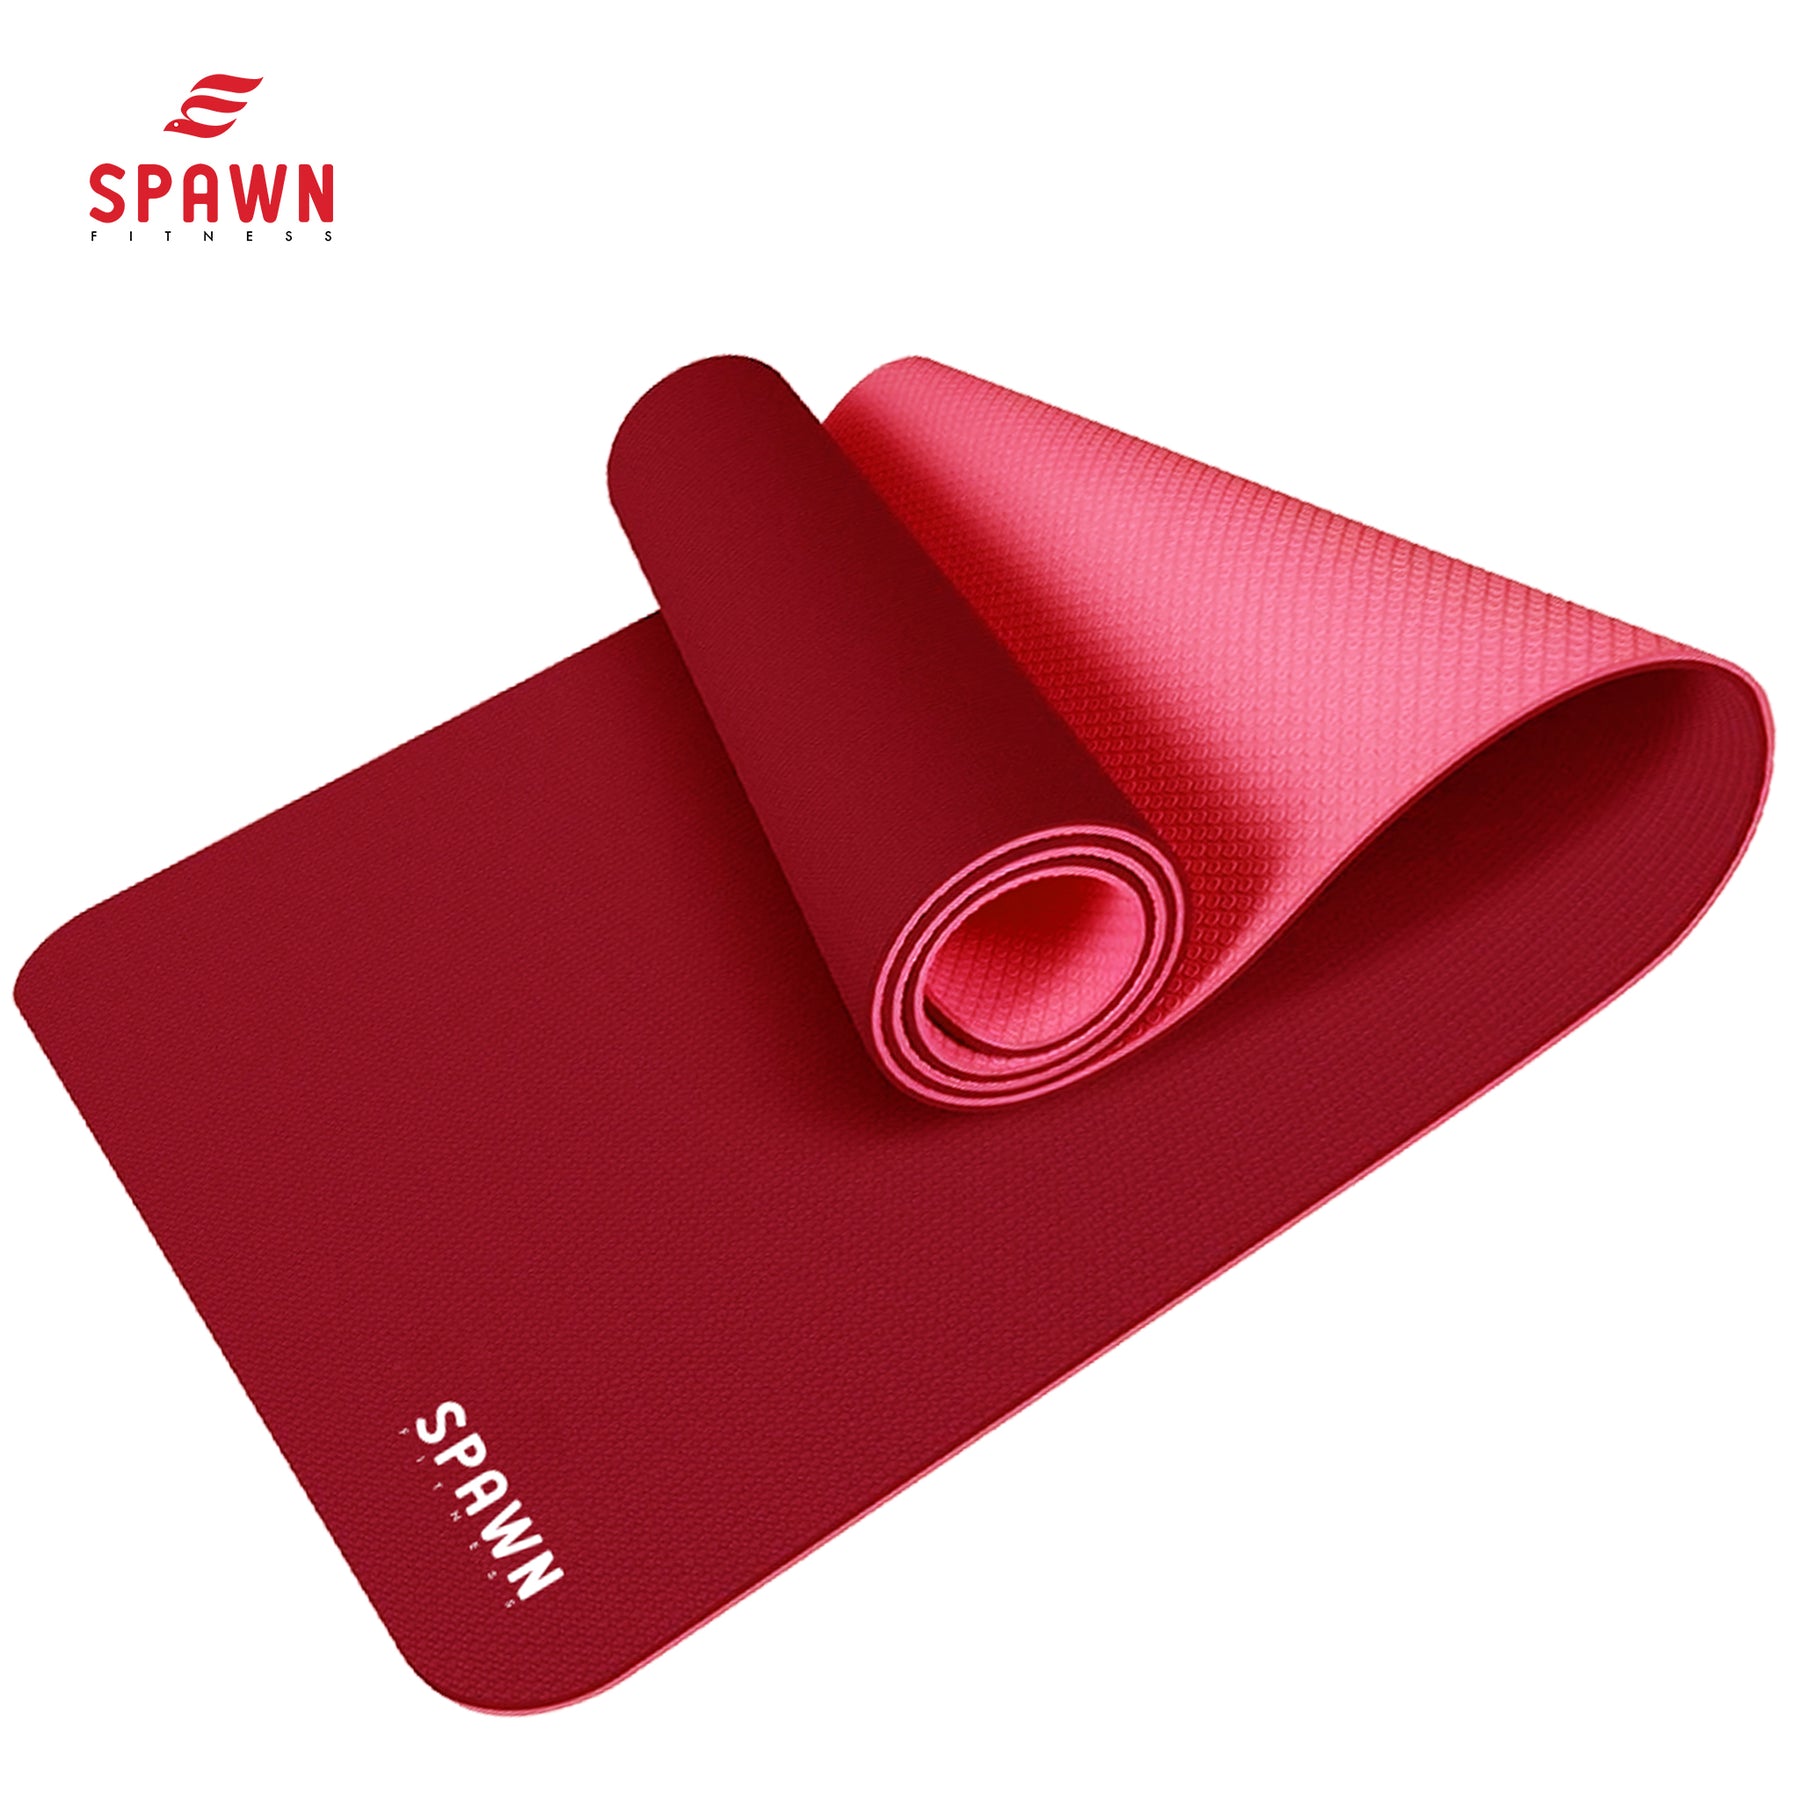 Spawn Fitness Yoga Exercise Workout Mat Excersize Mats for Floor